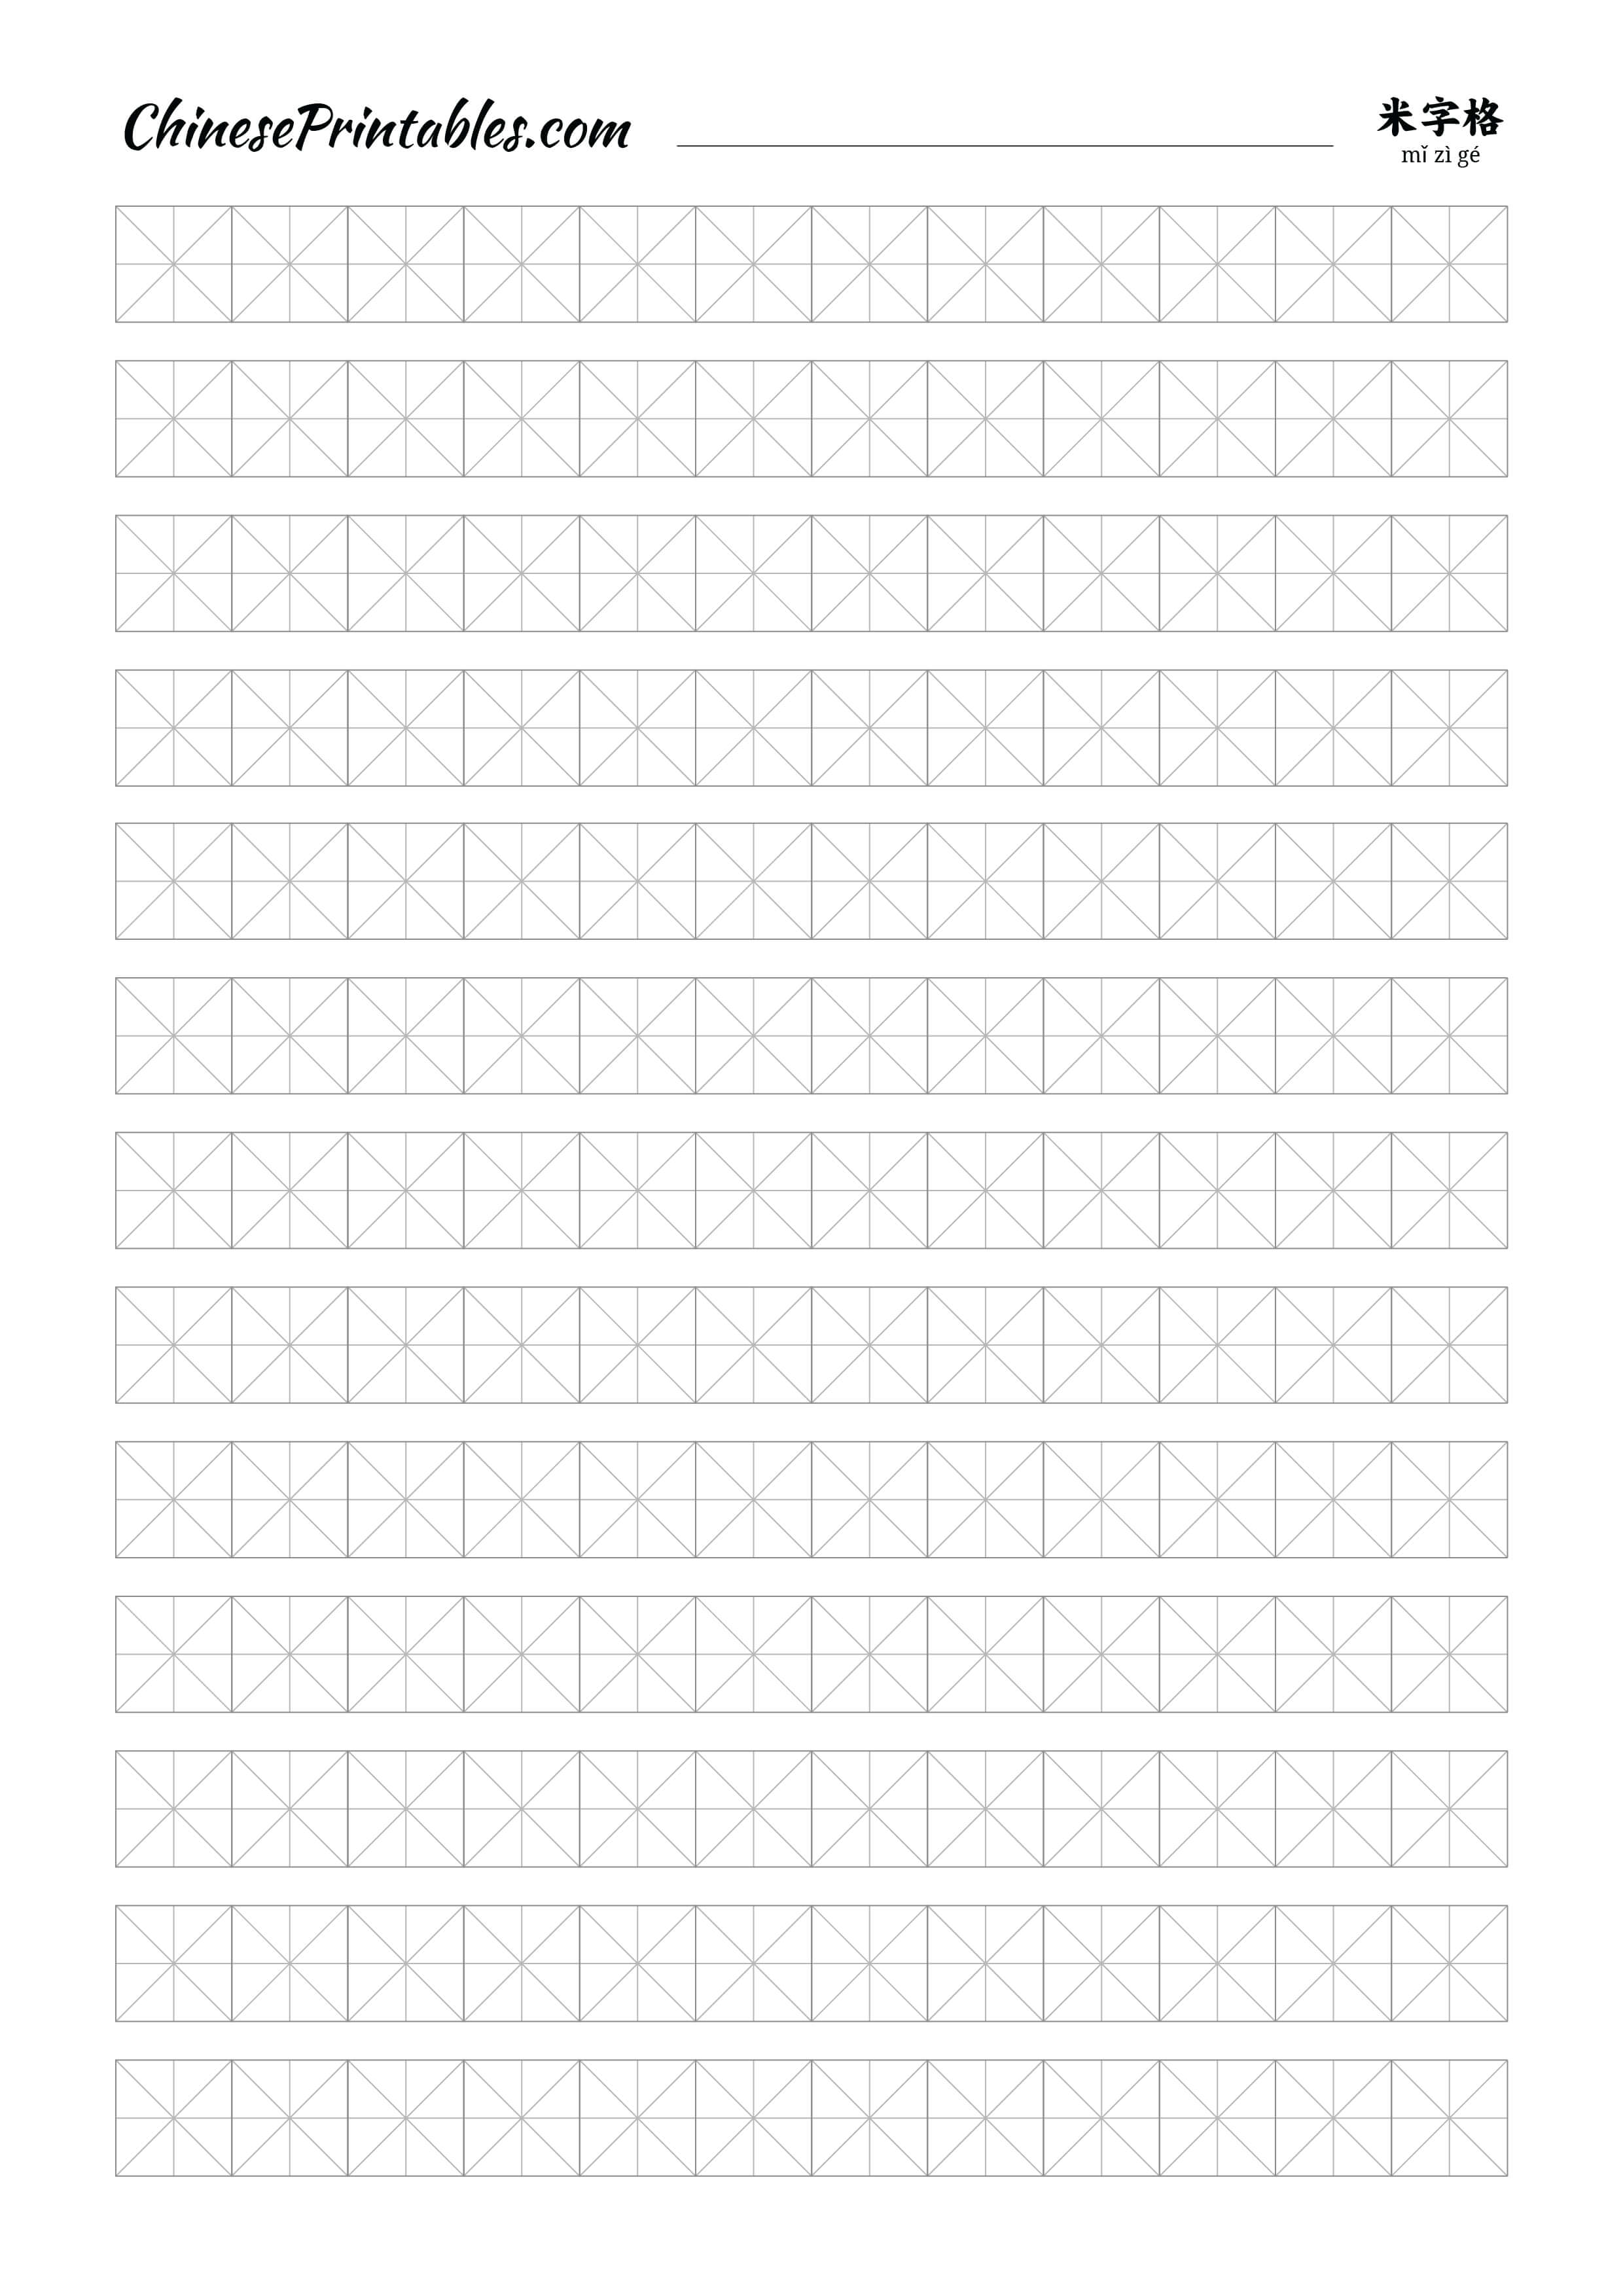 Chinese Printables – Free Printable Resources To Help You Pertaining To Blank Four Square Writing Template